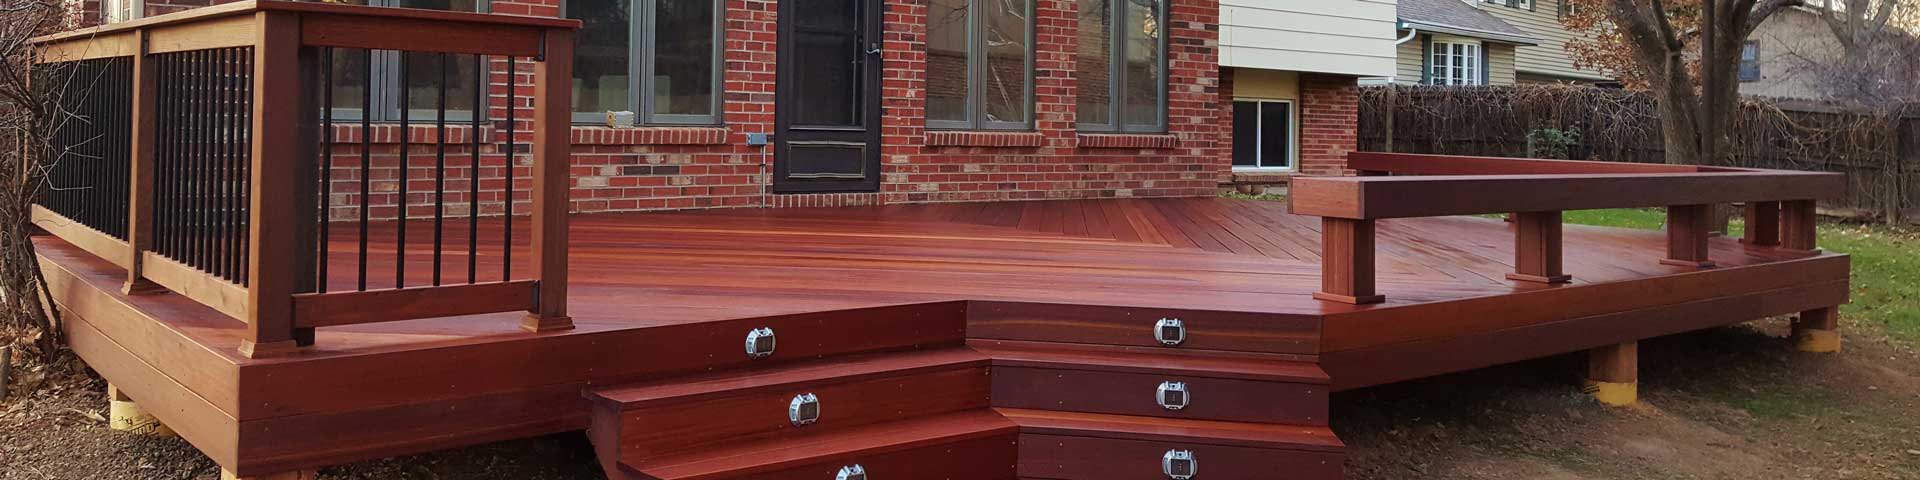 Our Decking Materials Come With Excellent Services